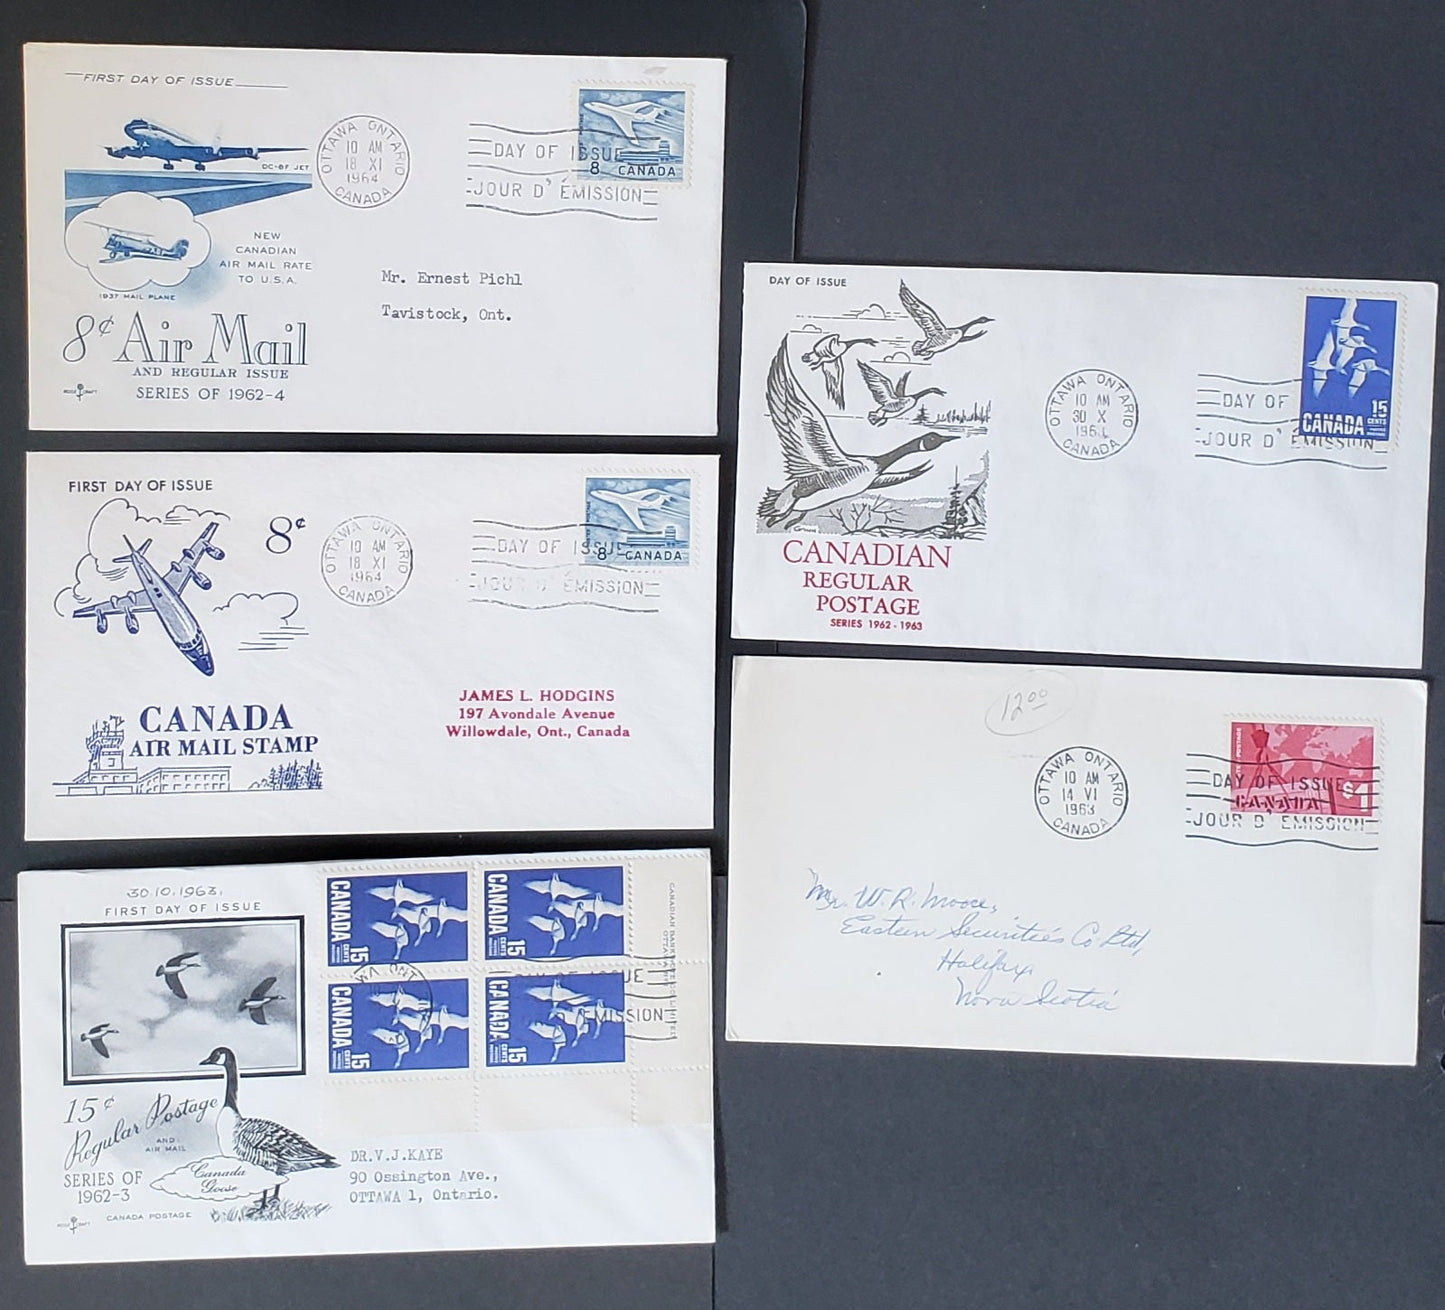 Lot 68 Canada #411,415,430 8c,15c,$1.00 Crane & Map, Goose, Jet 1964 Canadian Exports,Definitives, Jet Surcharge, 5 No Cachet, Rosecraft, Ginn A First Day Covers Franked With Singles,  All Addressed Except Ginn. Cat. Value $29